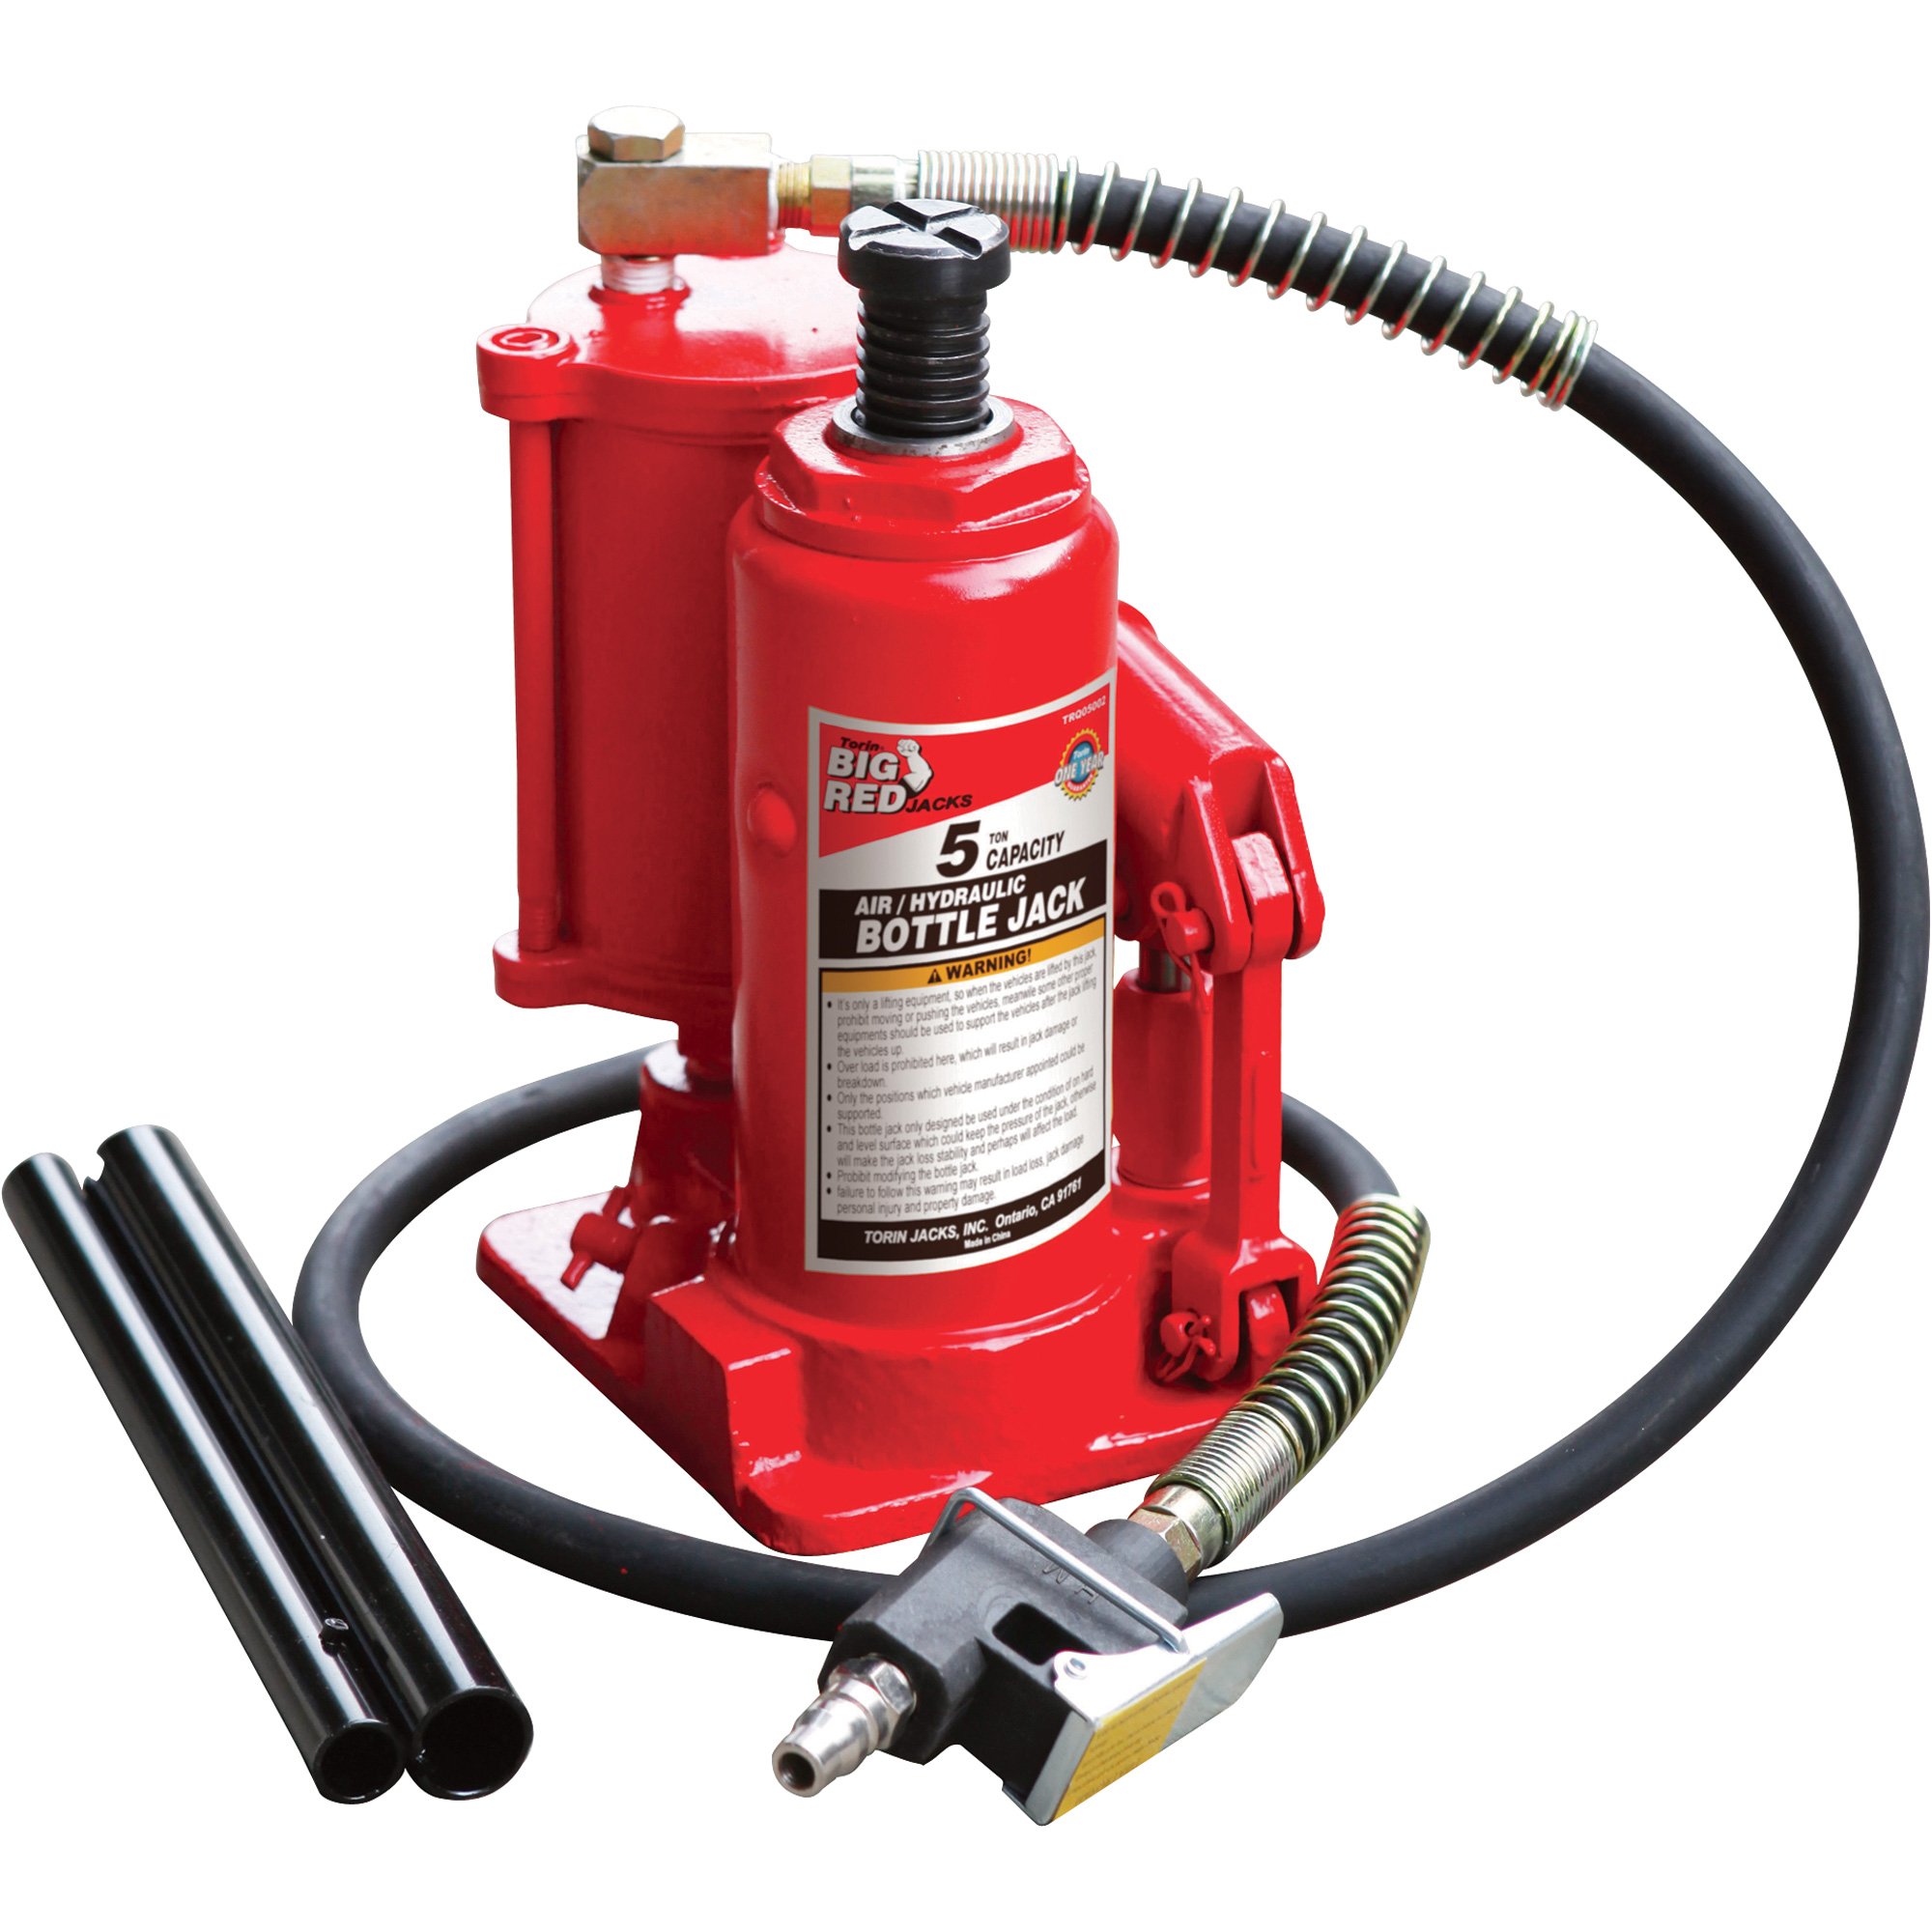 Please see replacement item# 46209. Torin Air/Hydraulic Bottle Jack — Ton  Capacity, Model# TRQ05002 Northern Tool